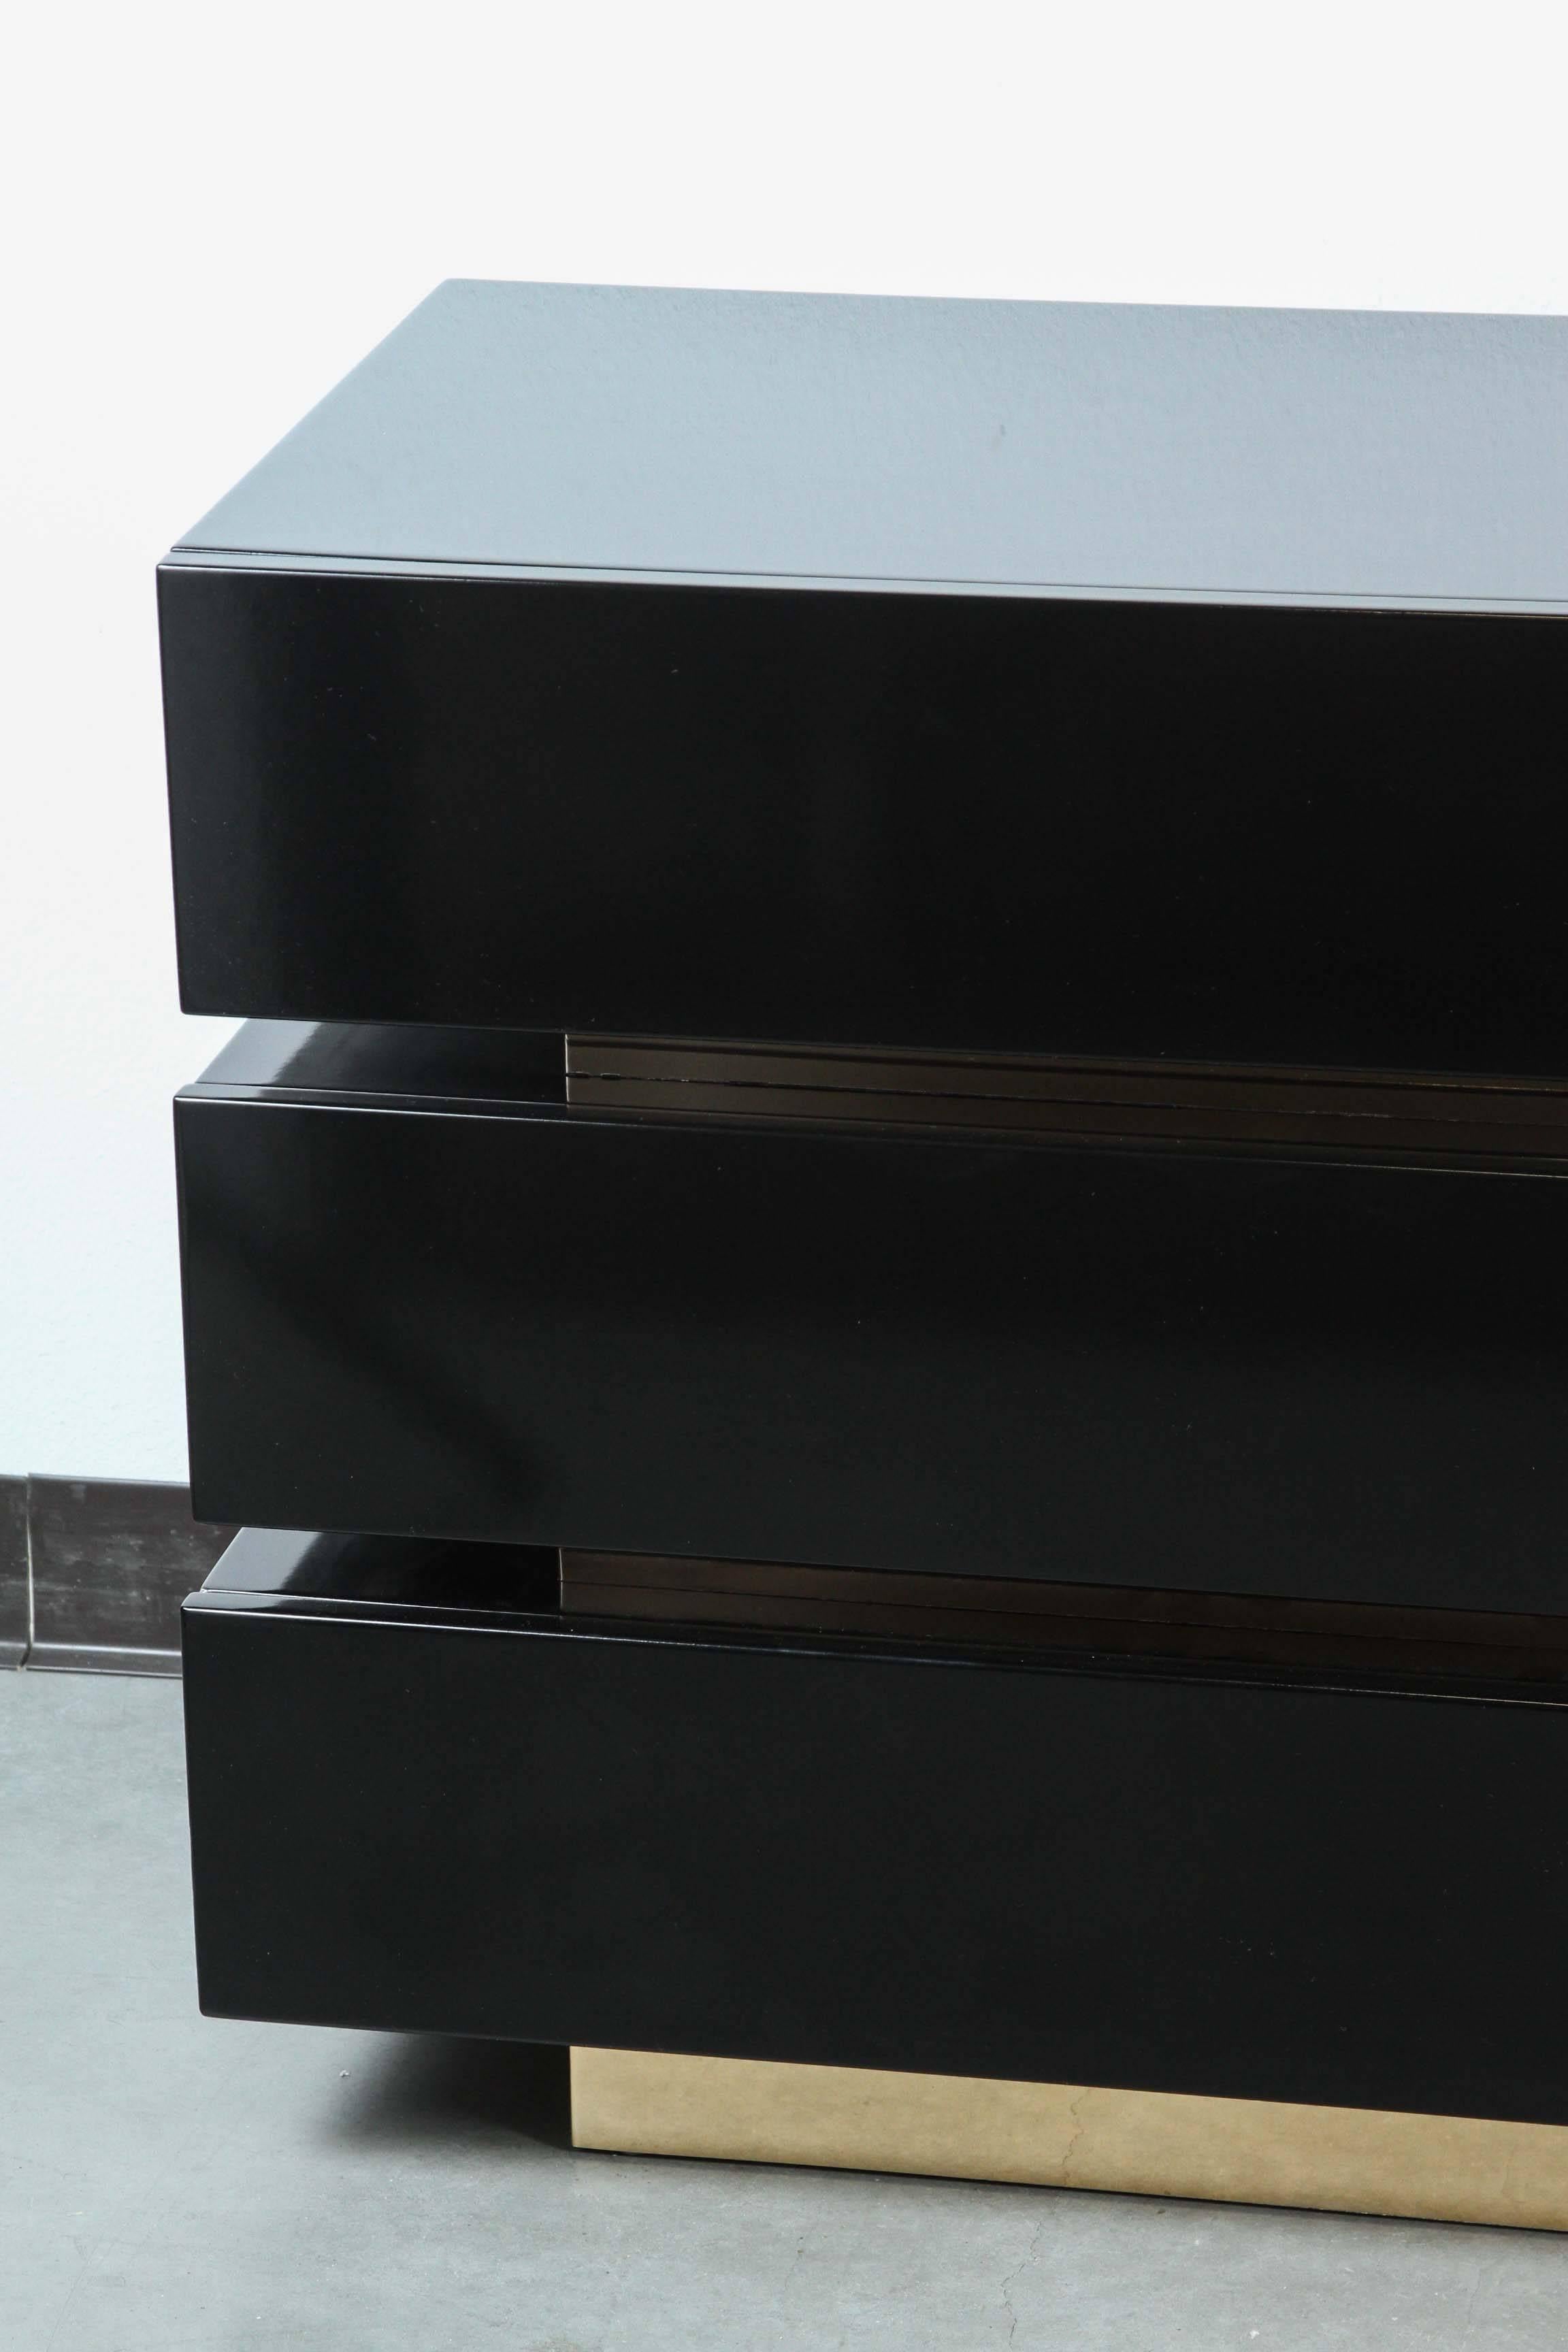 Stunning black lacquered dresser.
The nine-drawer dresser is made up of three pieces that are separated by rich Golden/Brass plinths.
It has been newly refinished in a high gloss black lacquer.